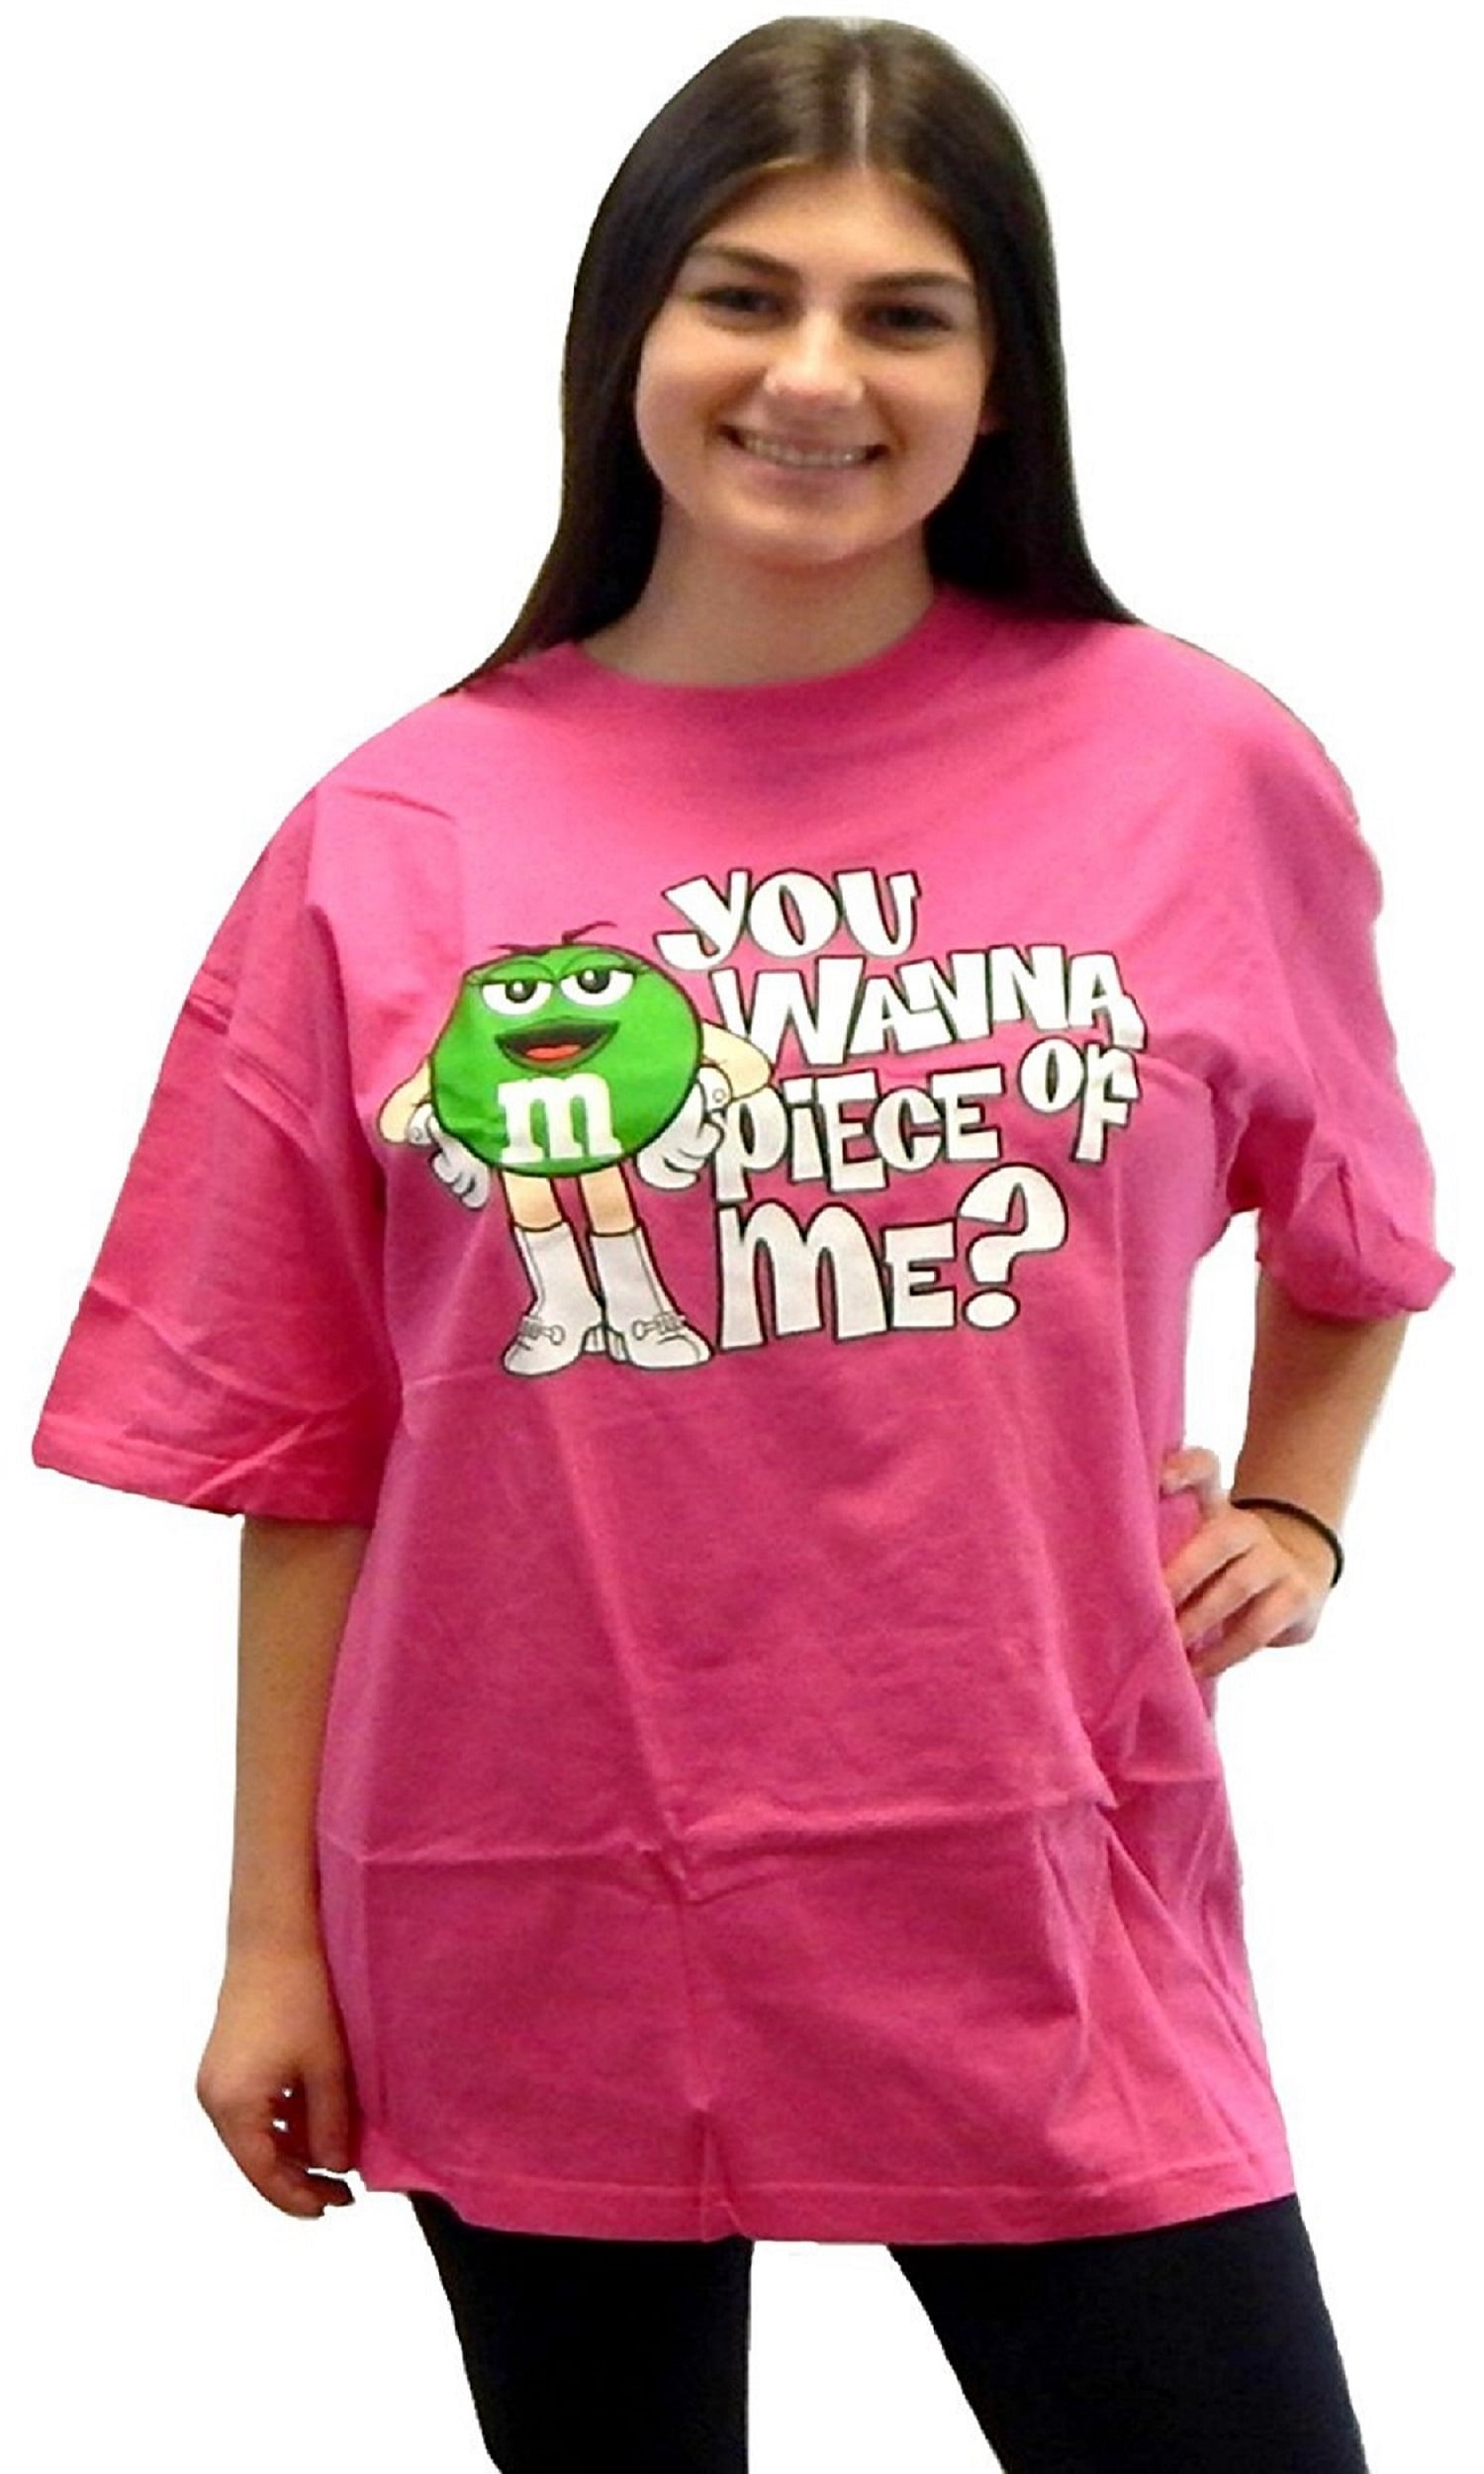 M & M Pink Chocolate Melts In Your Mouth Cotton T-Shirt Adult Size XL